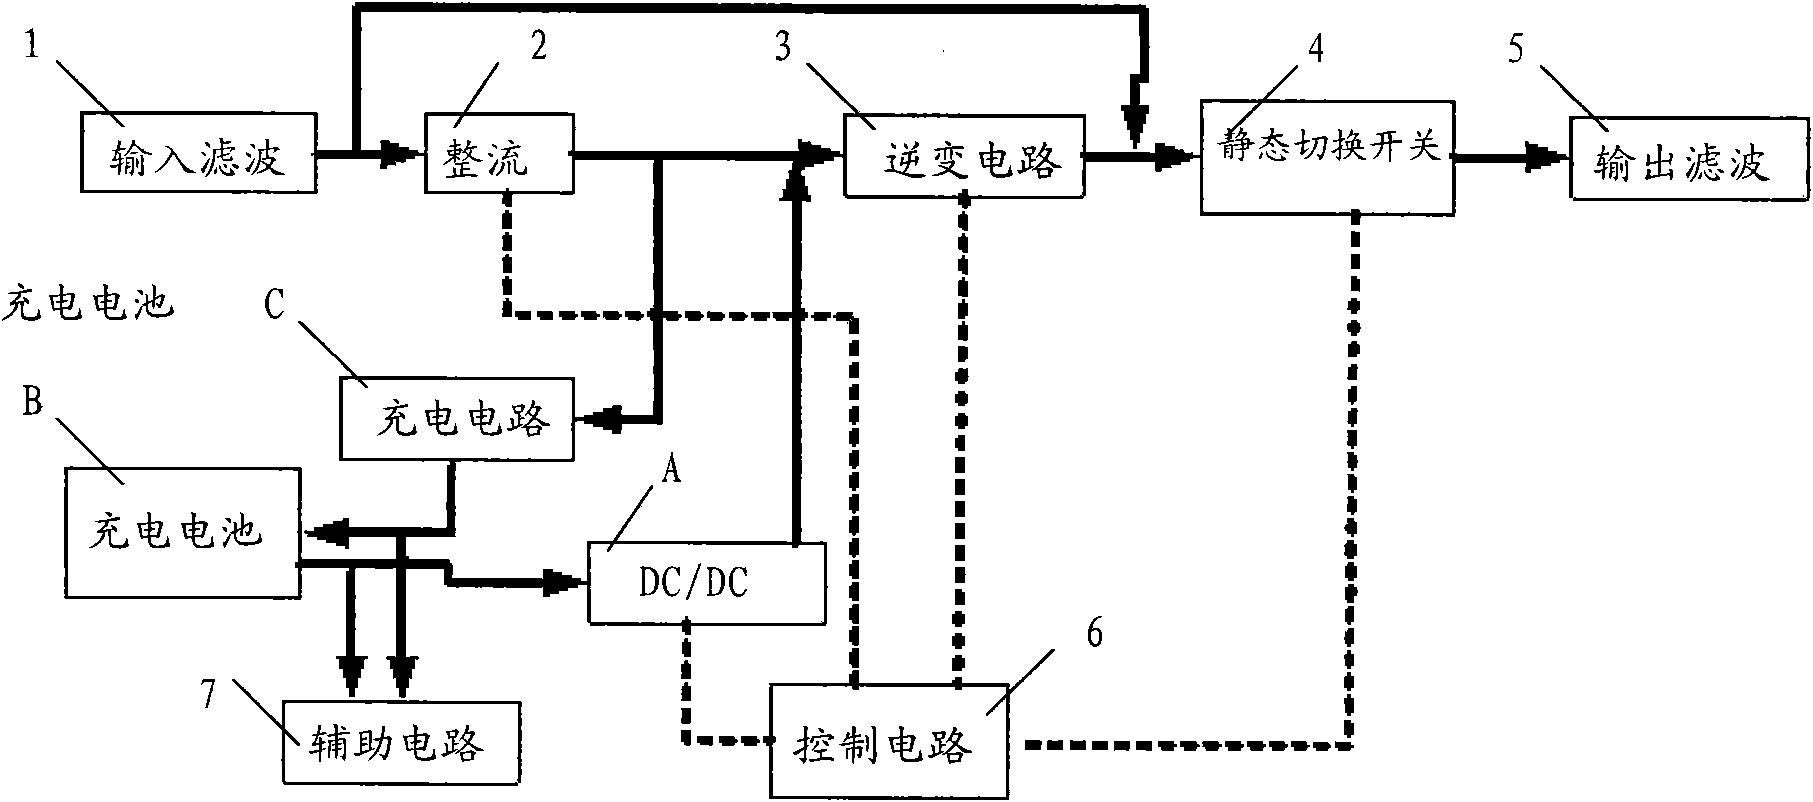 UPS (Uninterrupted Power Supply) power supply control circuit and UPS power supply